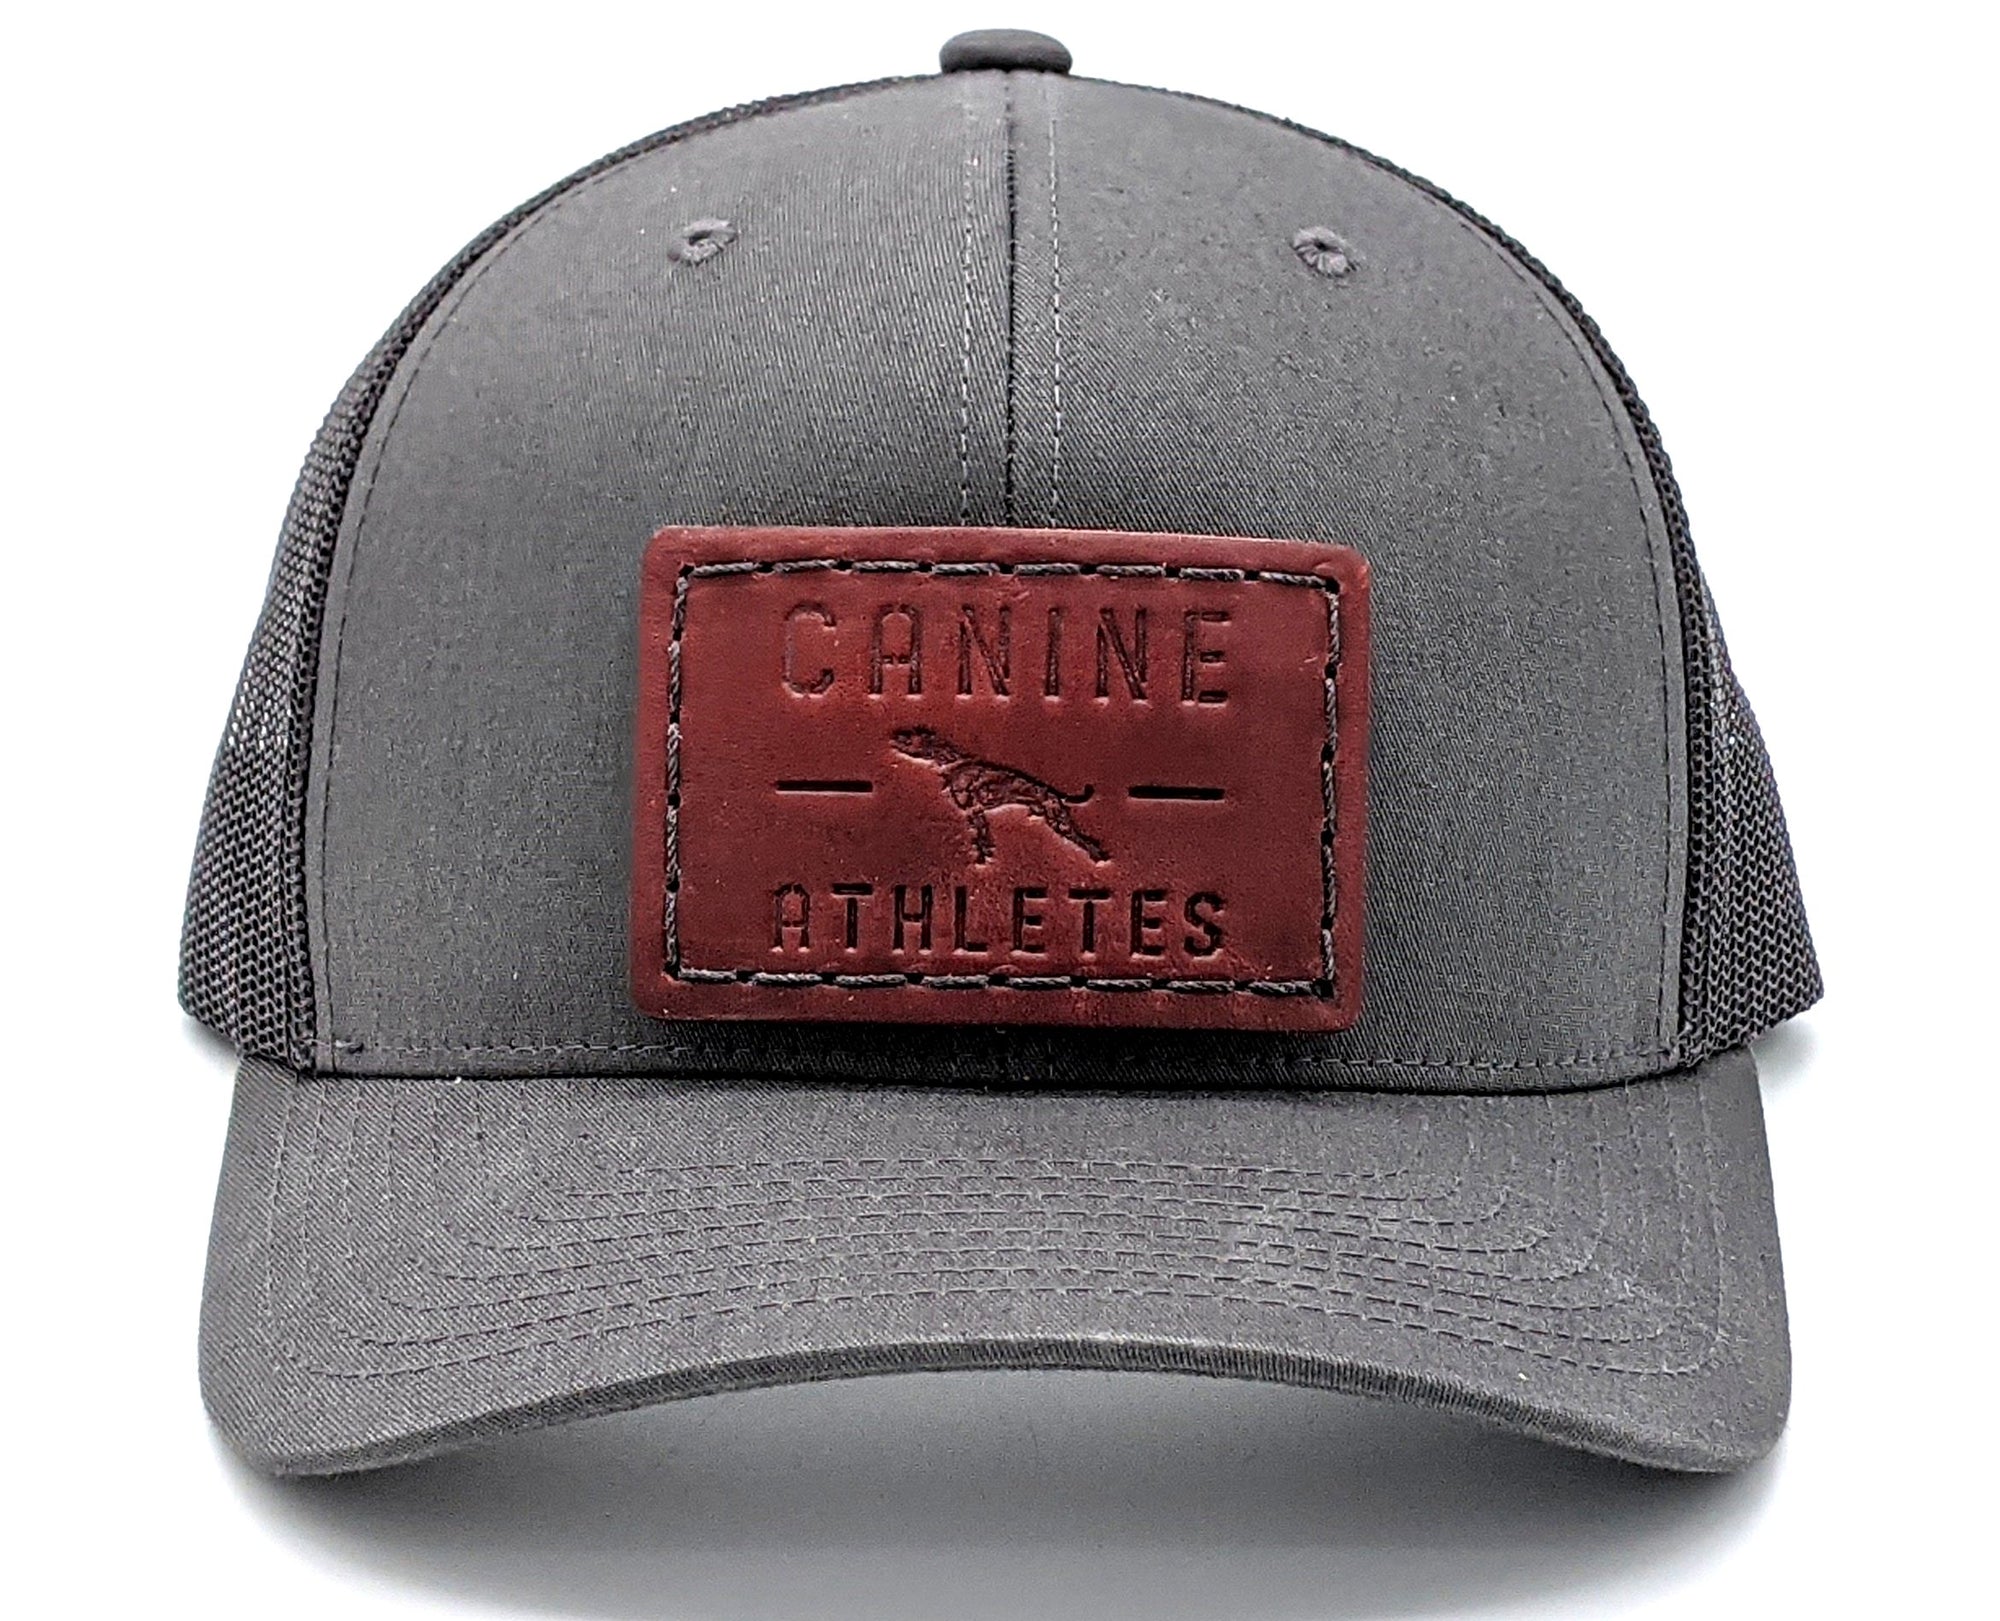 Canine Athletes x TGR Leather Patch Charcoal/Black Snapback Trucker Hat